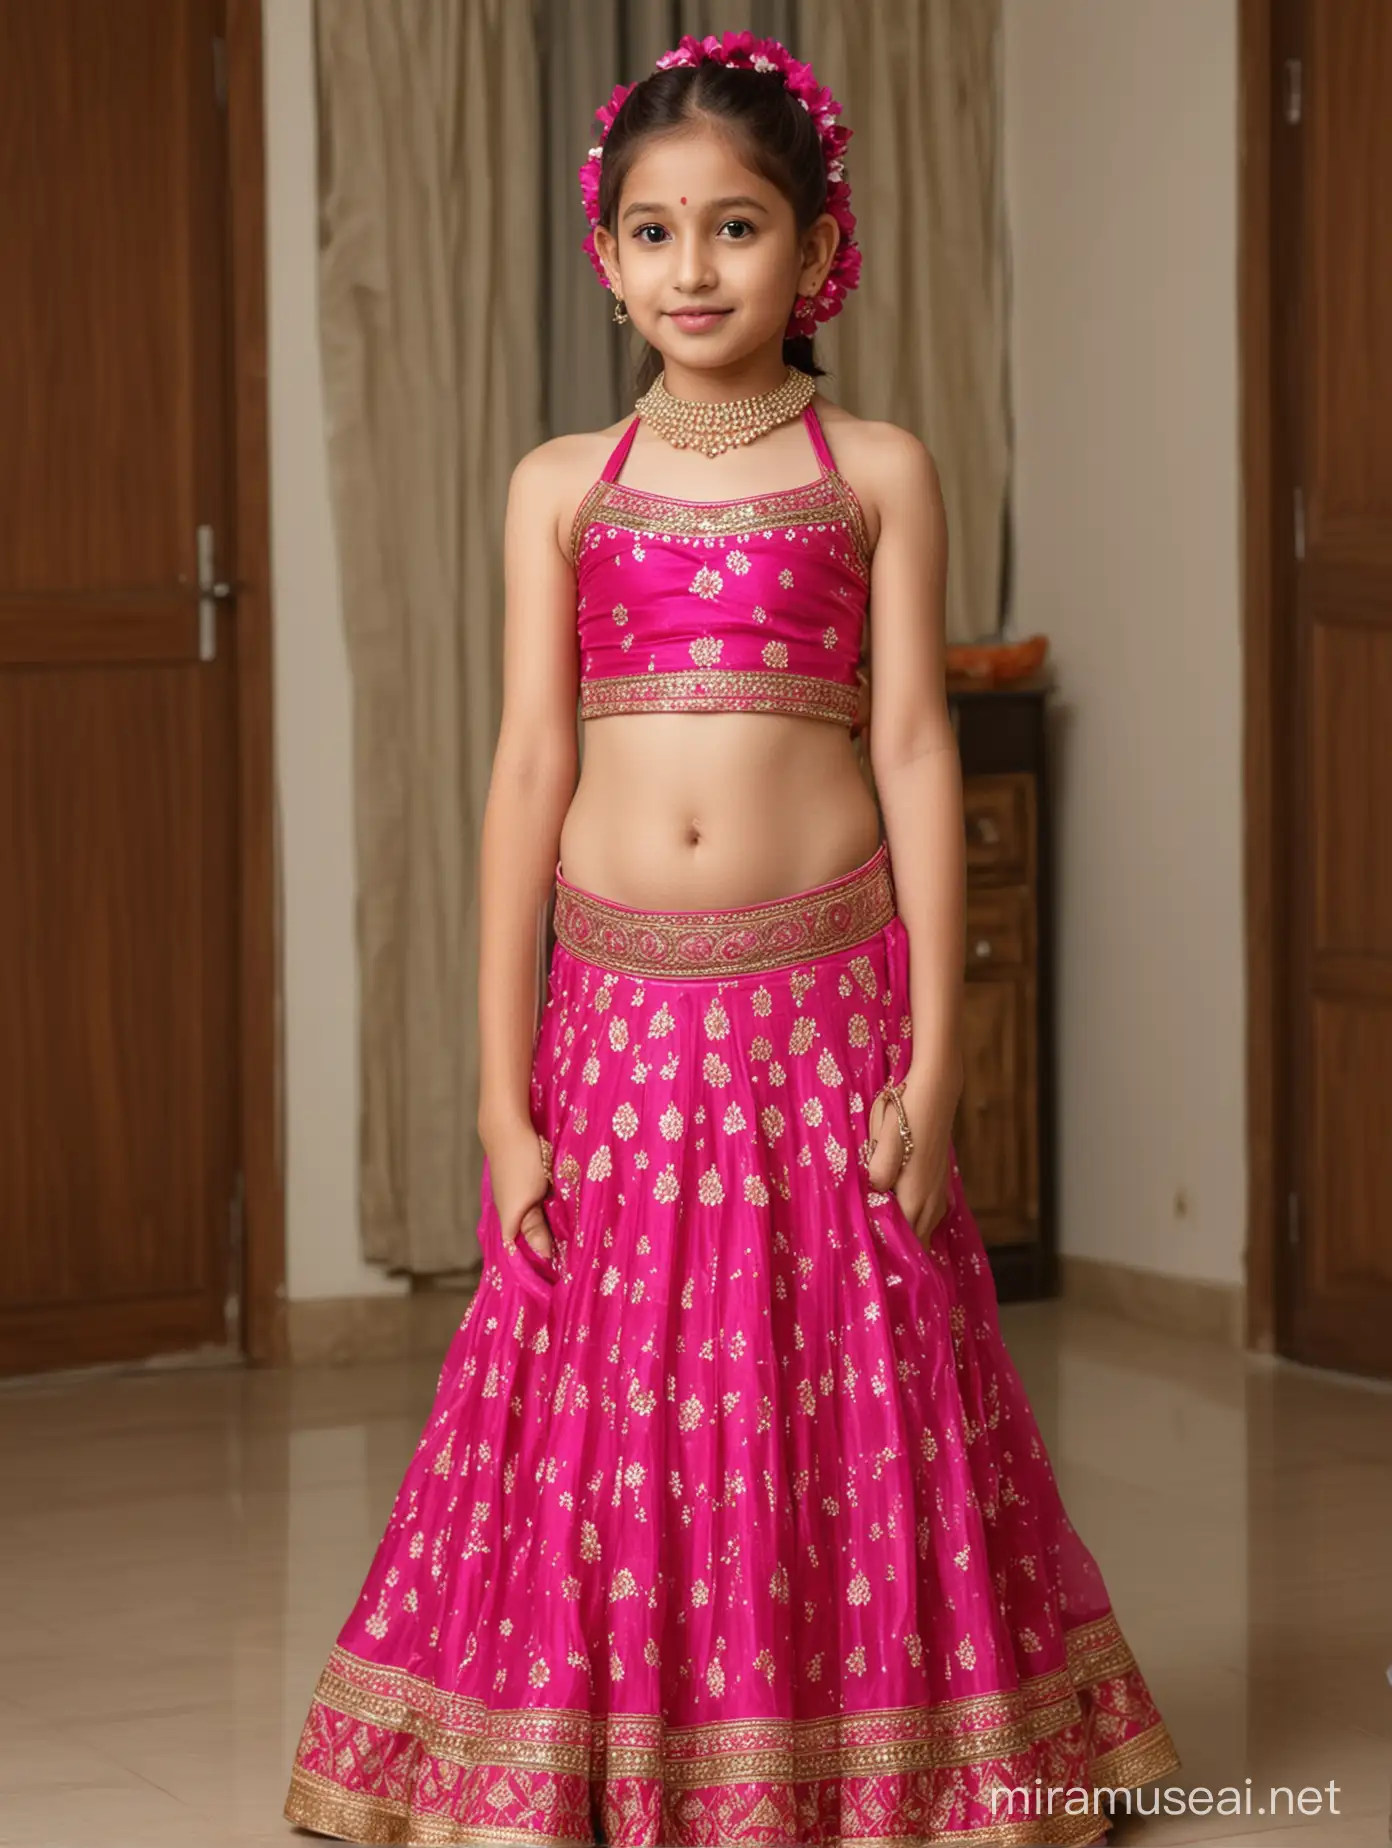 10 years old girl, white skin, beautiful, wearing fuchsia very thin halter neck very thin choli with lehenga, her front view, in well lit house